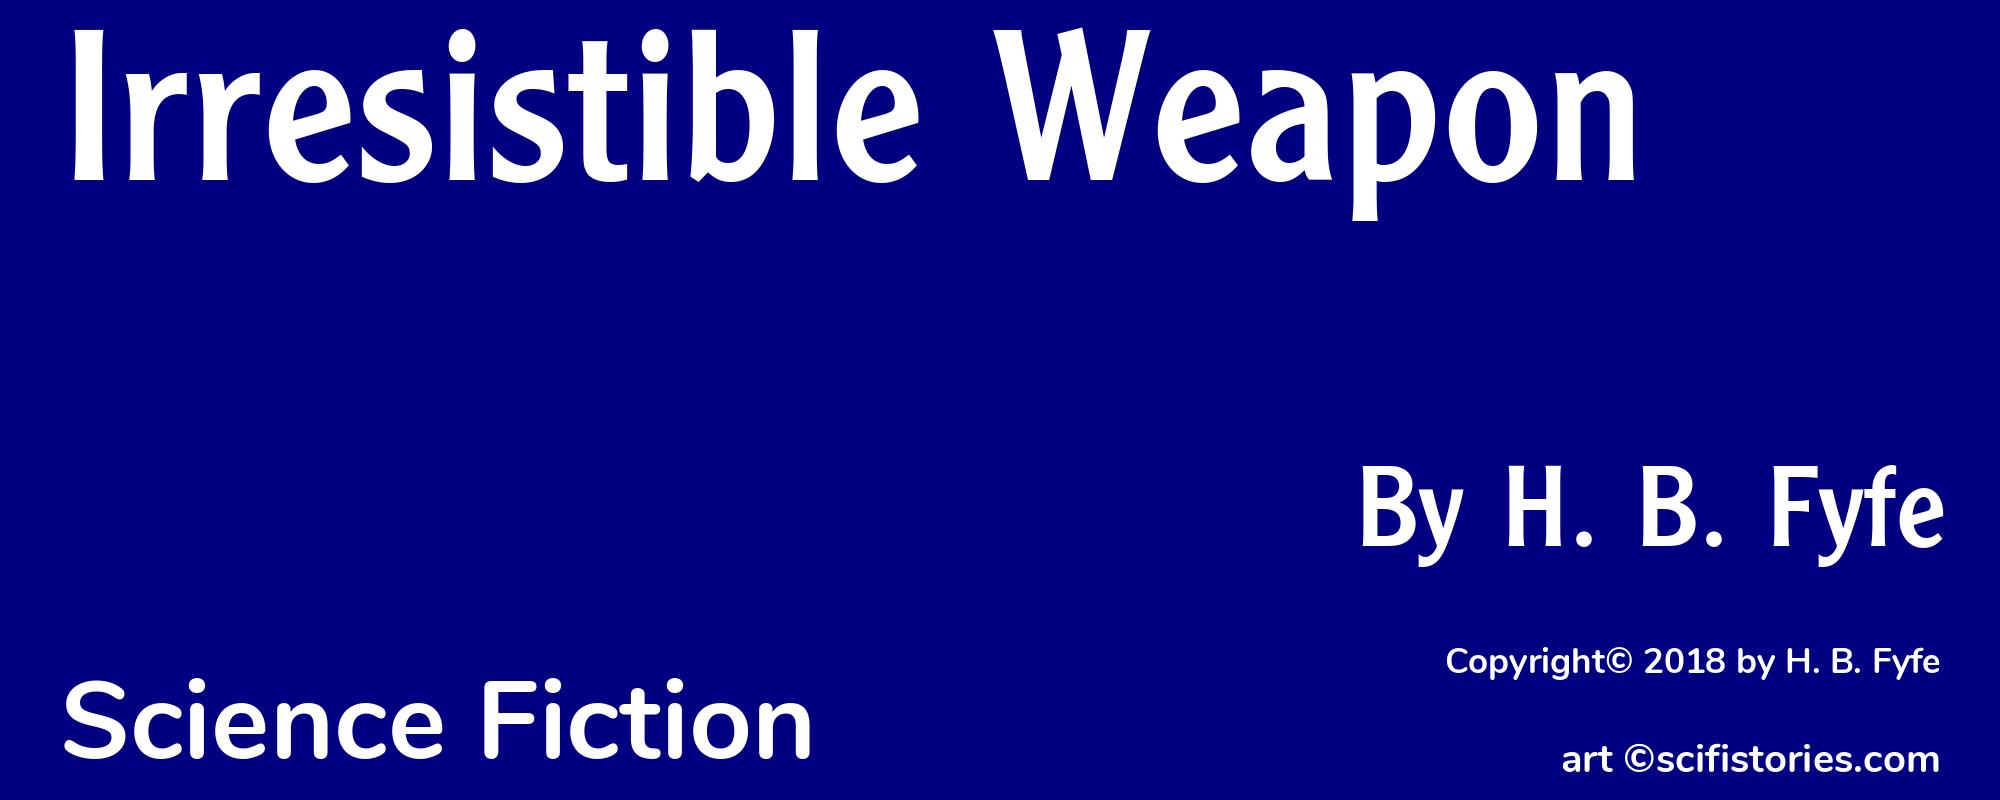 Irresistible Weapon - Cover